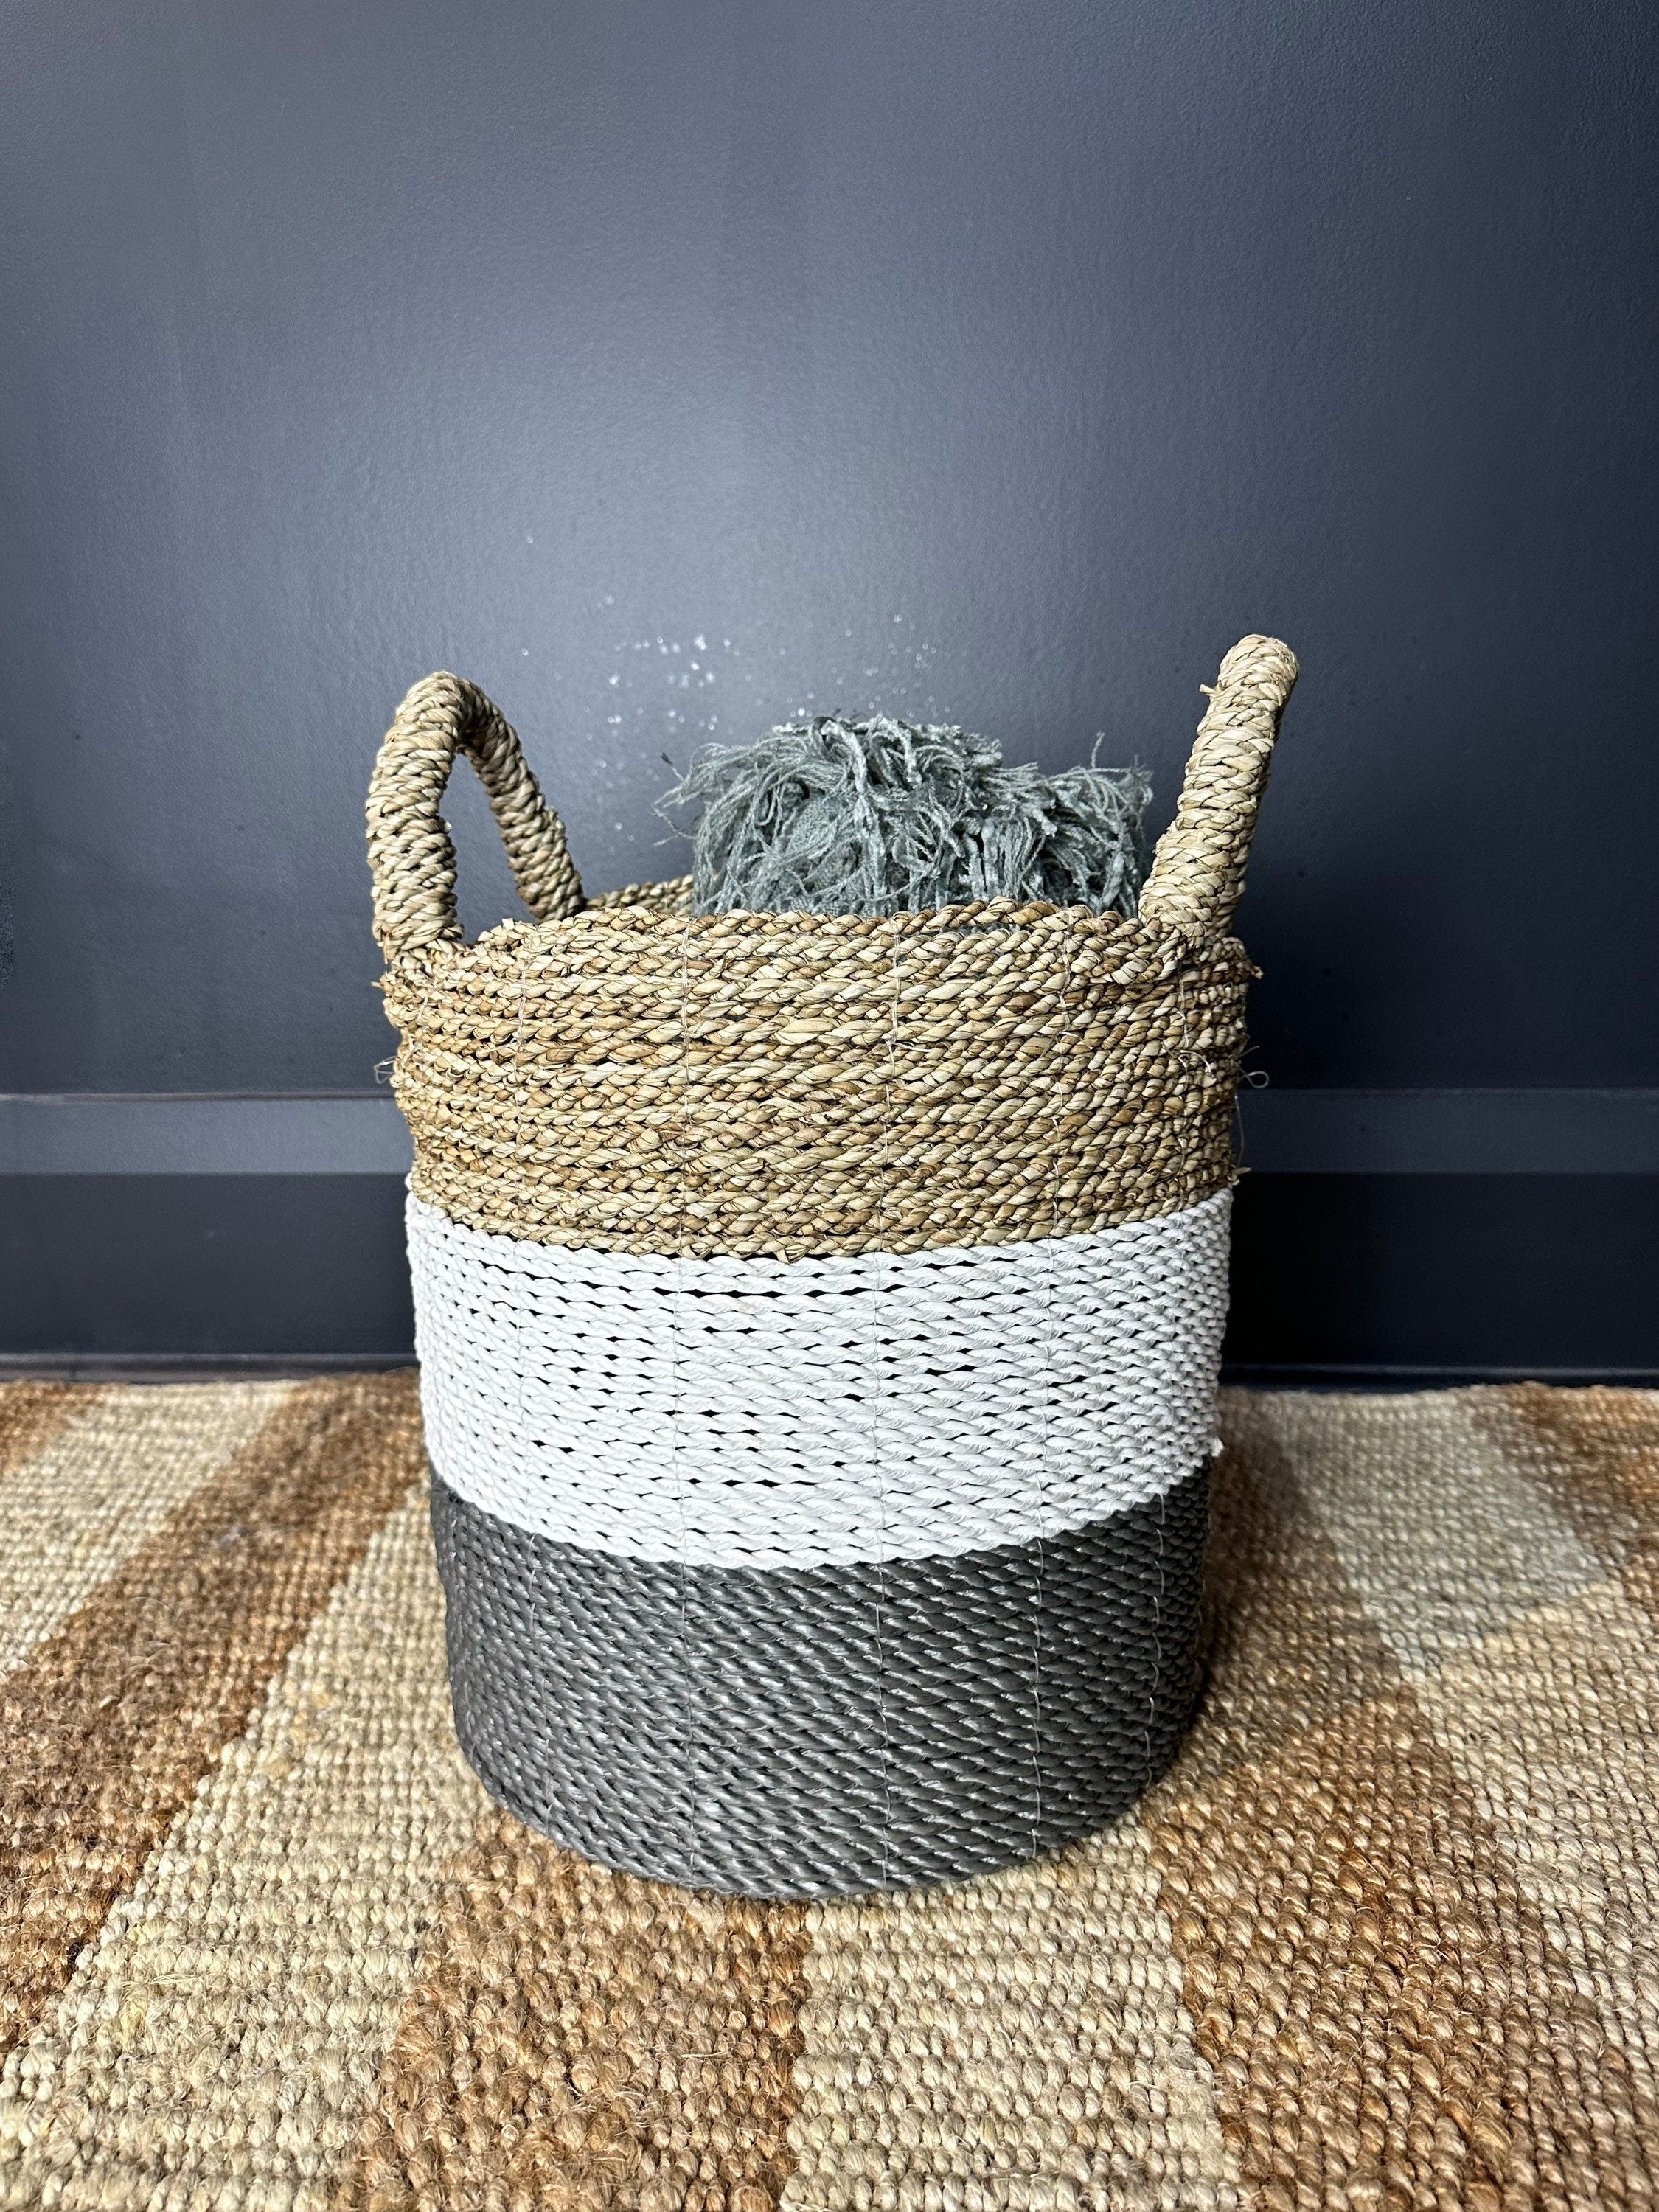 Two-tone Set of 2 Wicker Storage Basket Set, Rattan Cylindrical Holder, Woven Supplies Holder